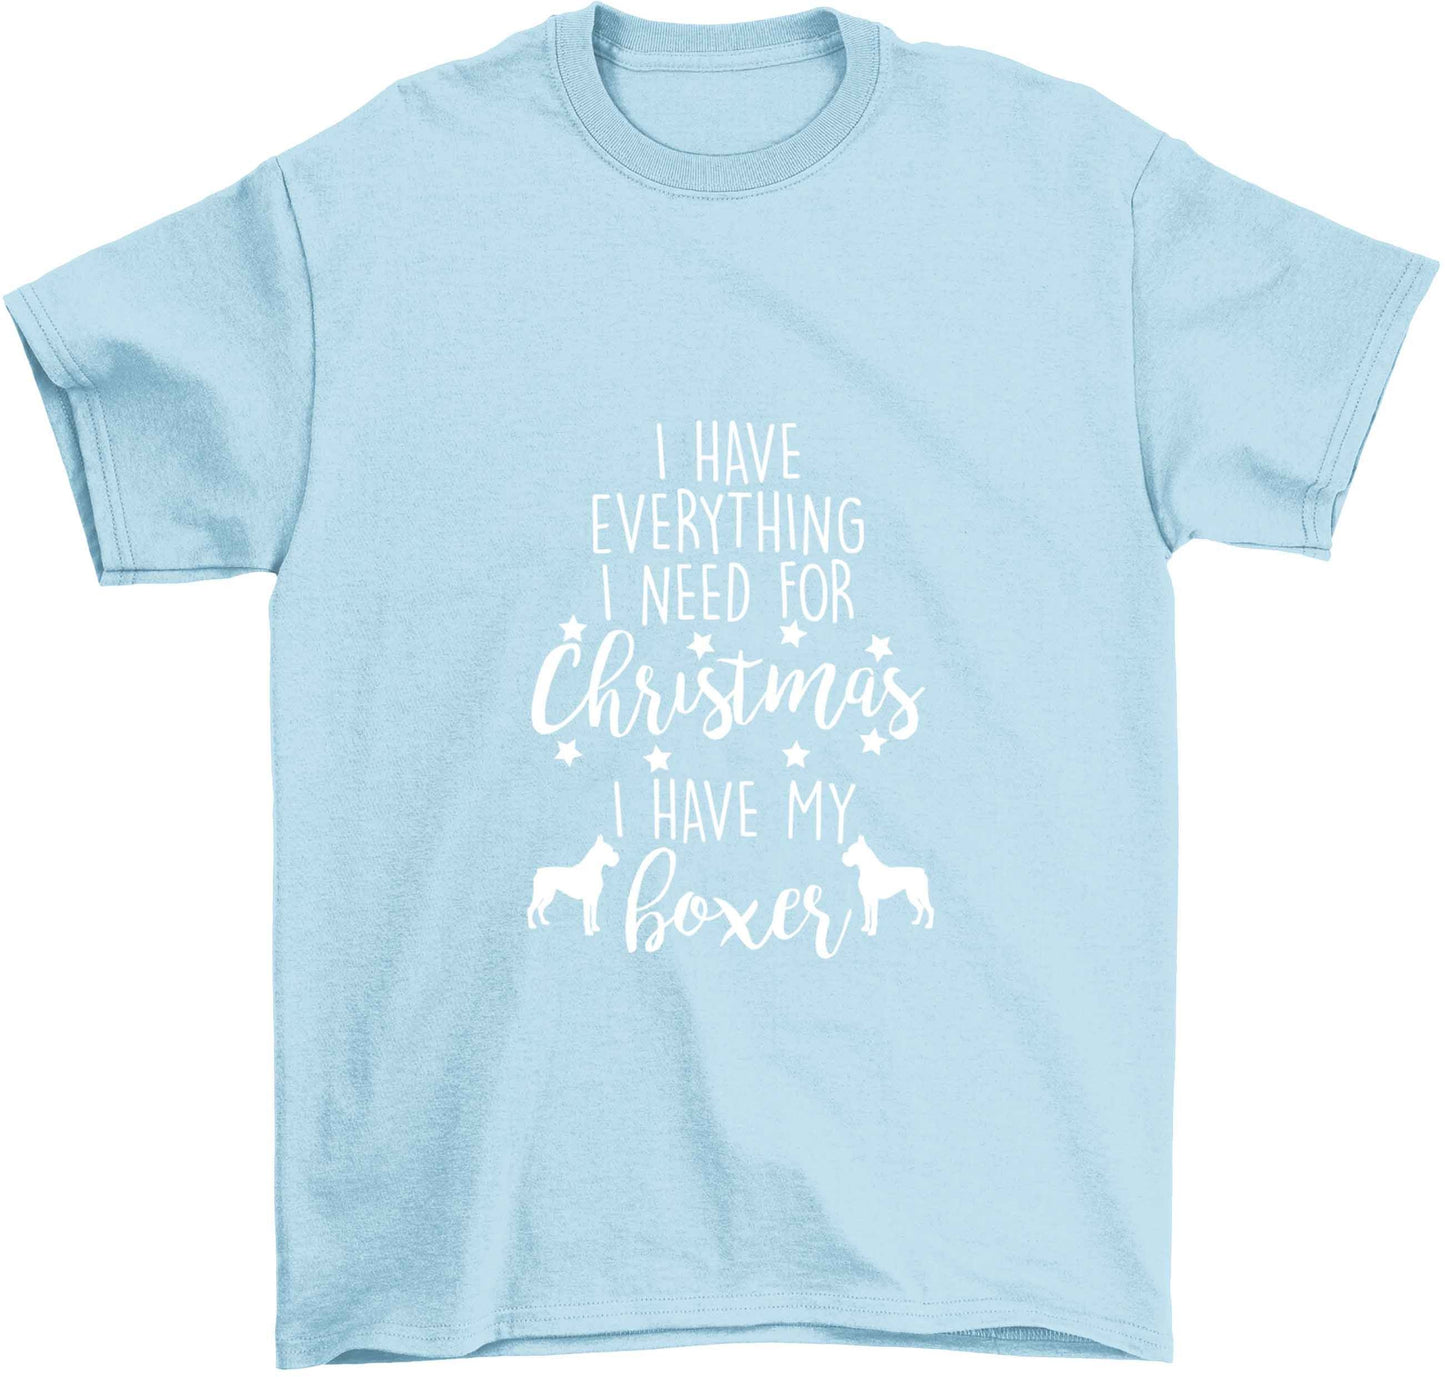 I have everything I need for Christmas I have my boxer Children's light blue Tshirt 12-13 Years